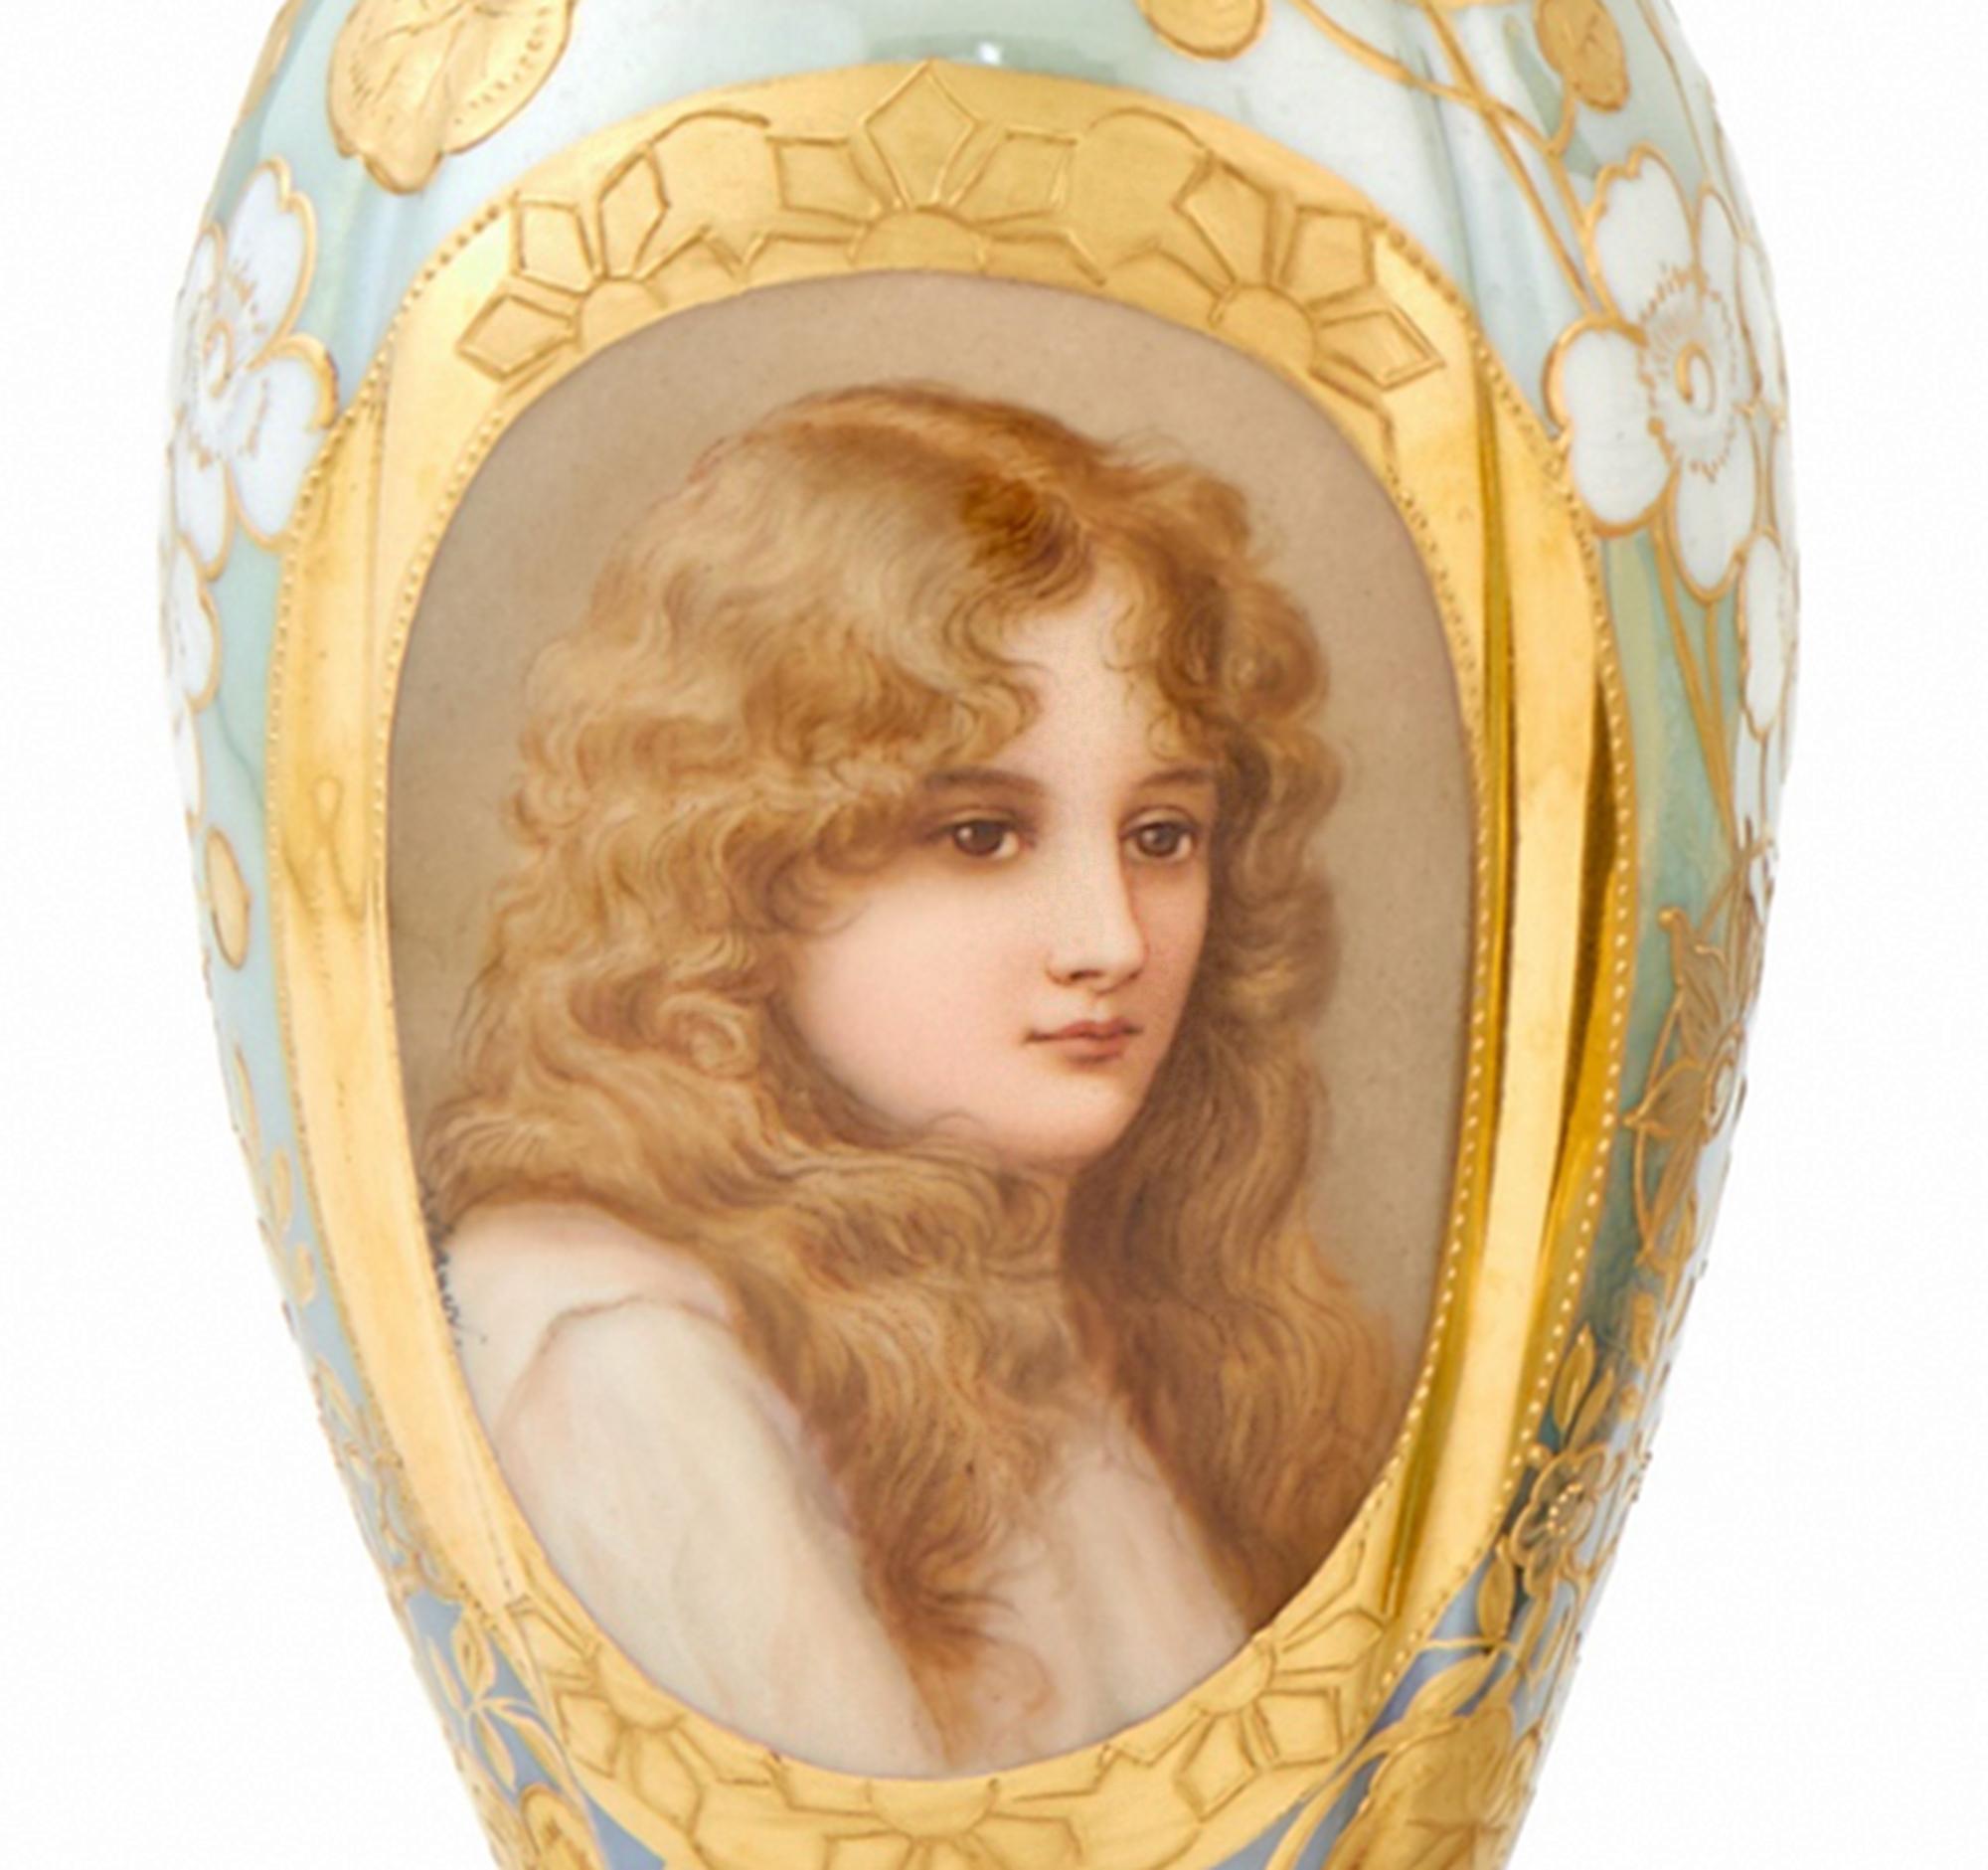  Art Nouveau Royal Vienna Hand-Painted Porcelain Portrait Cabinet Vase In Good Condition For Sale In New York, NY